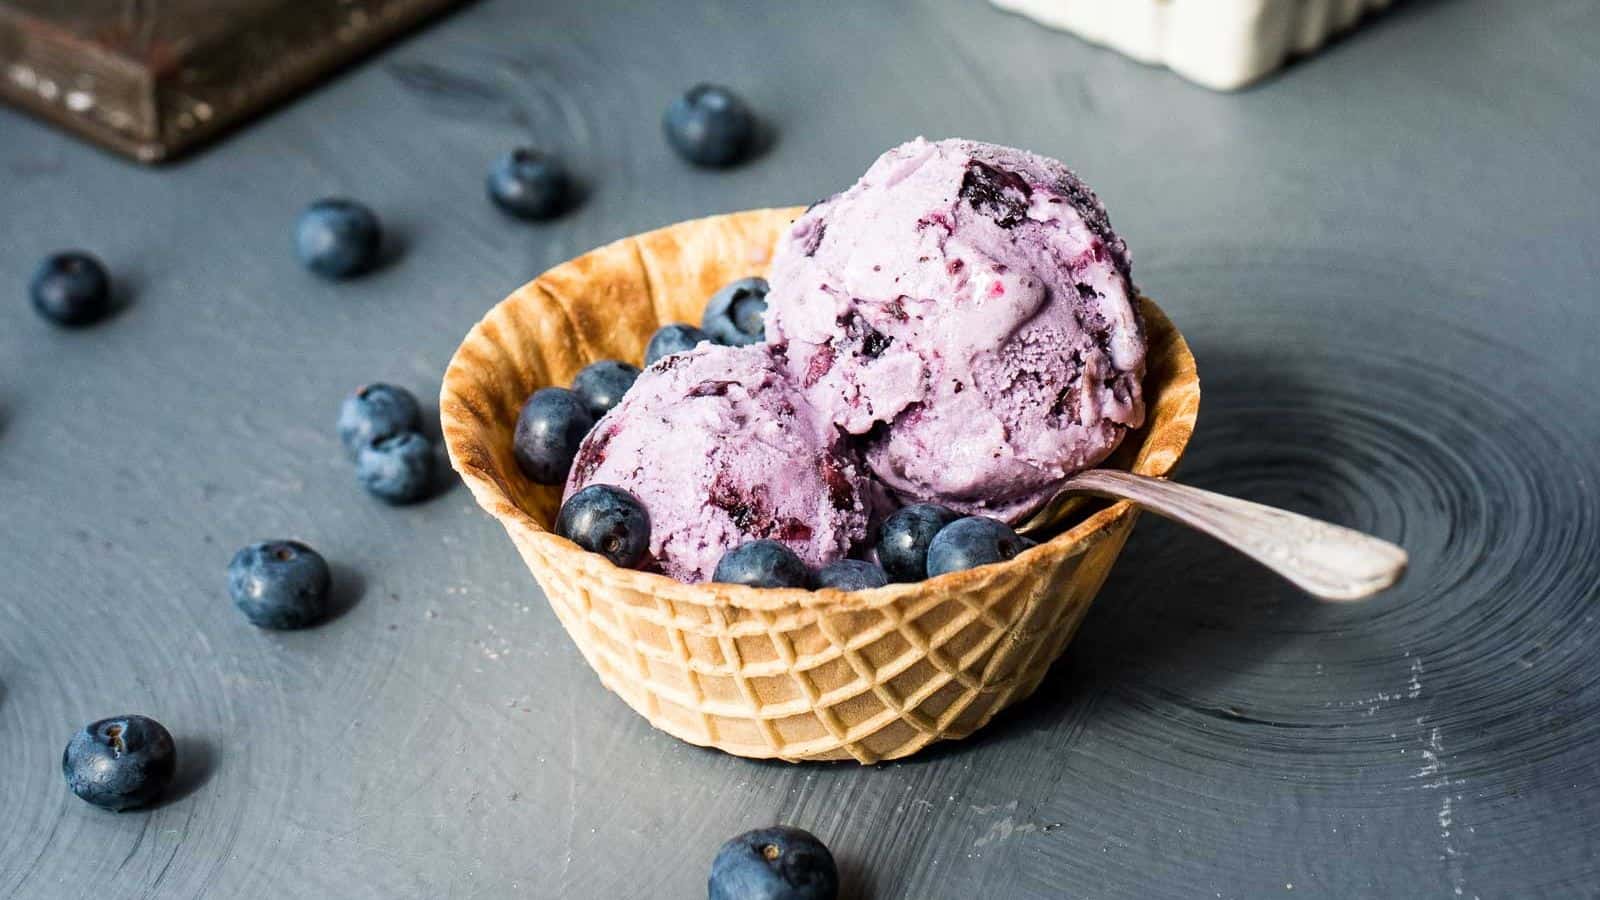 An overhead shot of homemade blueberry ice cream in a metal loaf pan next to waffle bowls, spoons, and a cream colored napkin.